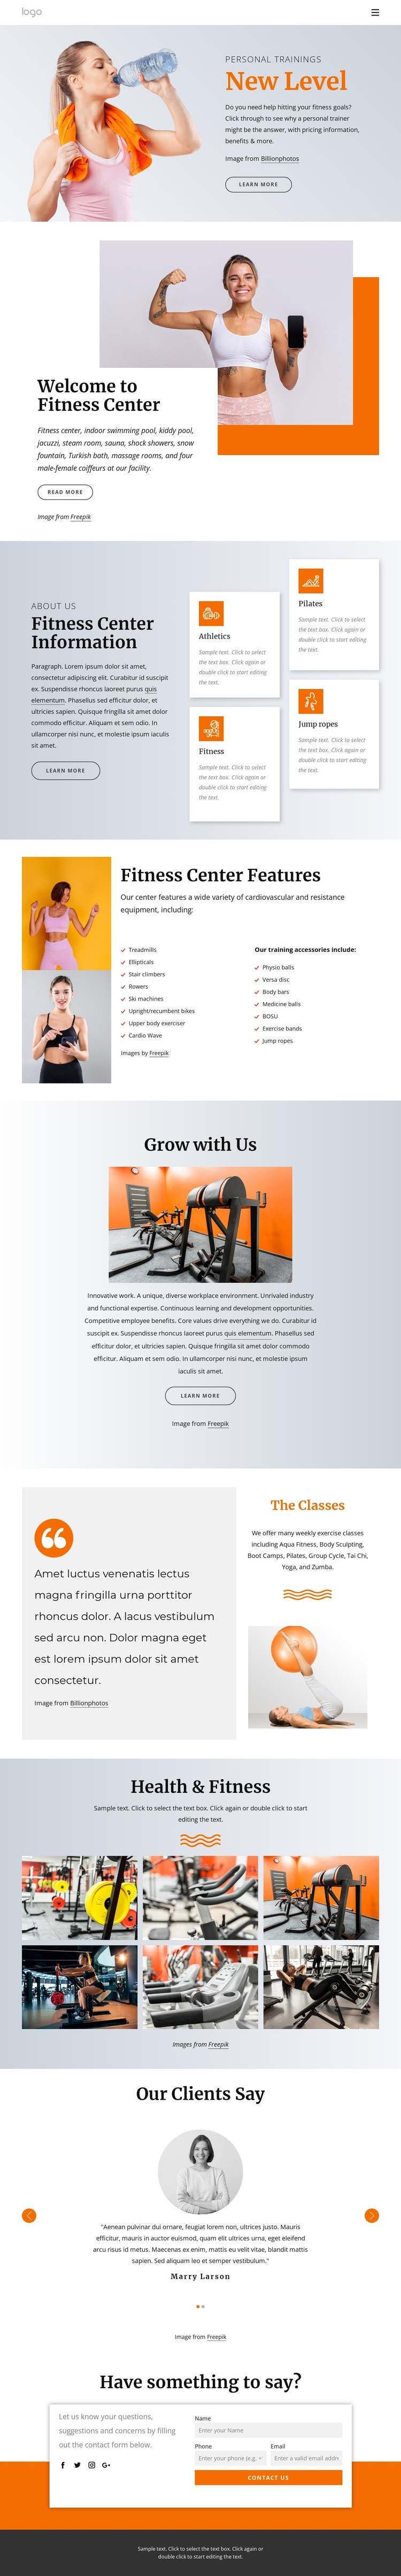 24 hour fitness center Template